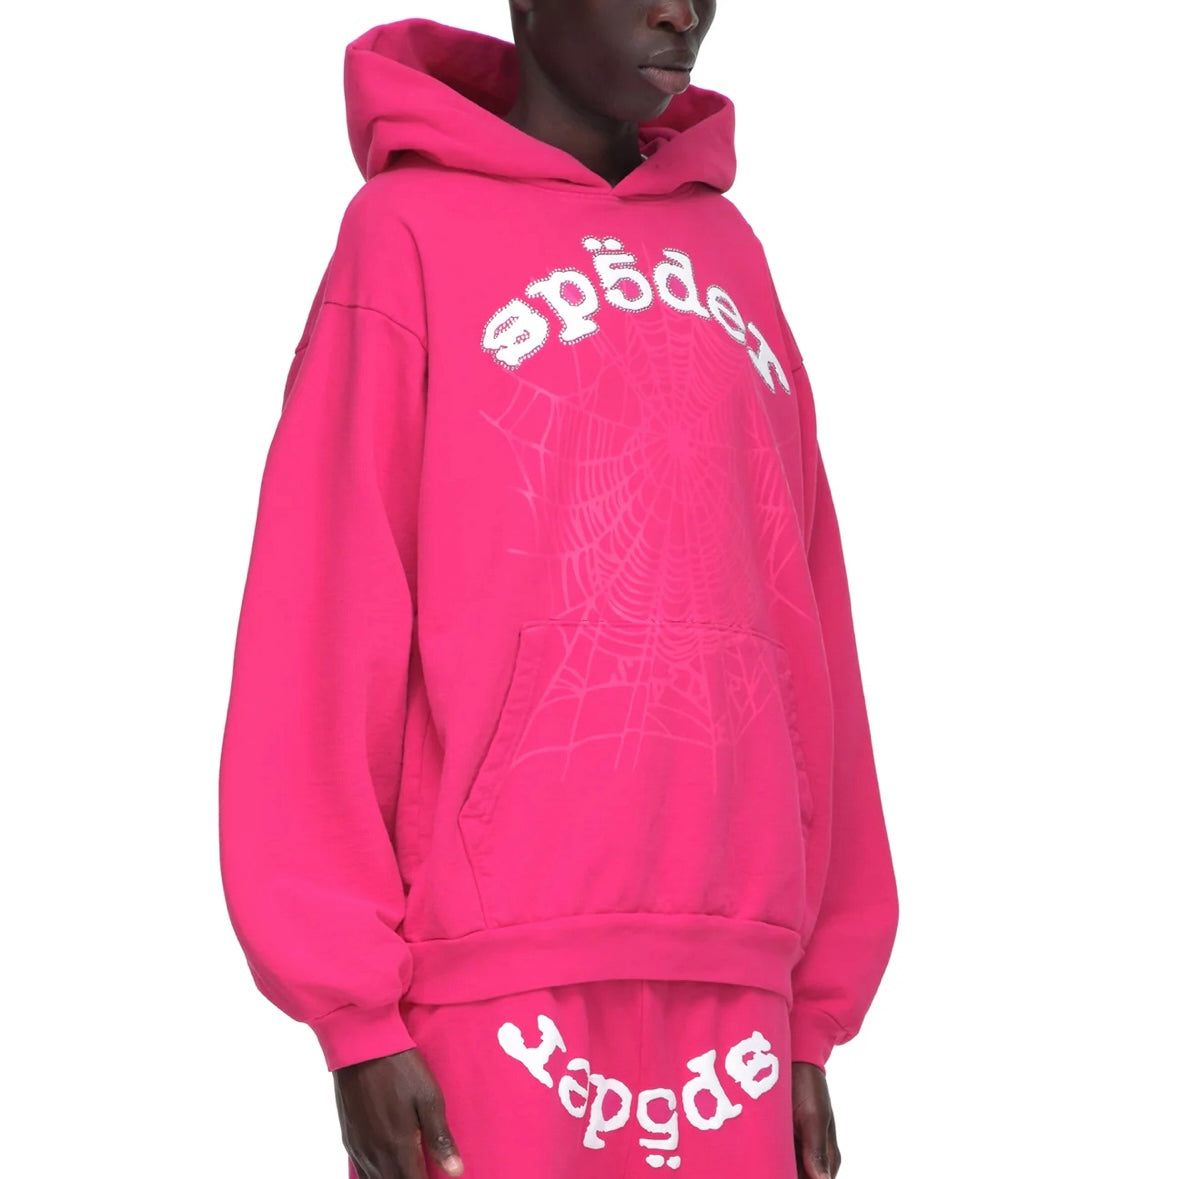 Sp5der Pink White Rhinestone Legacy Hoodie On Body Front Right